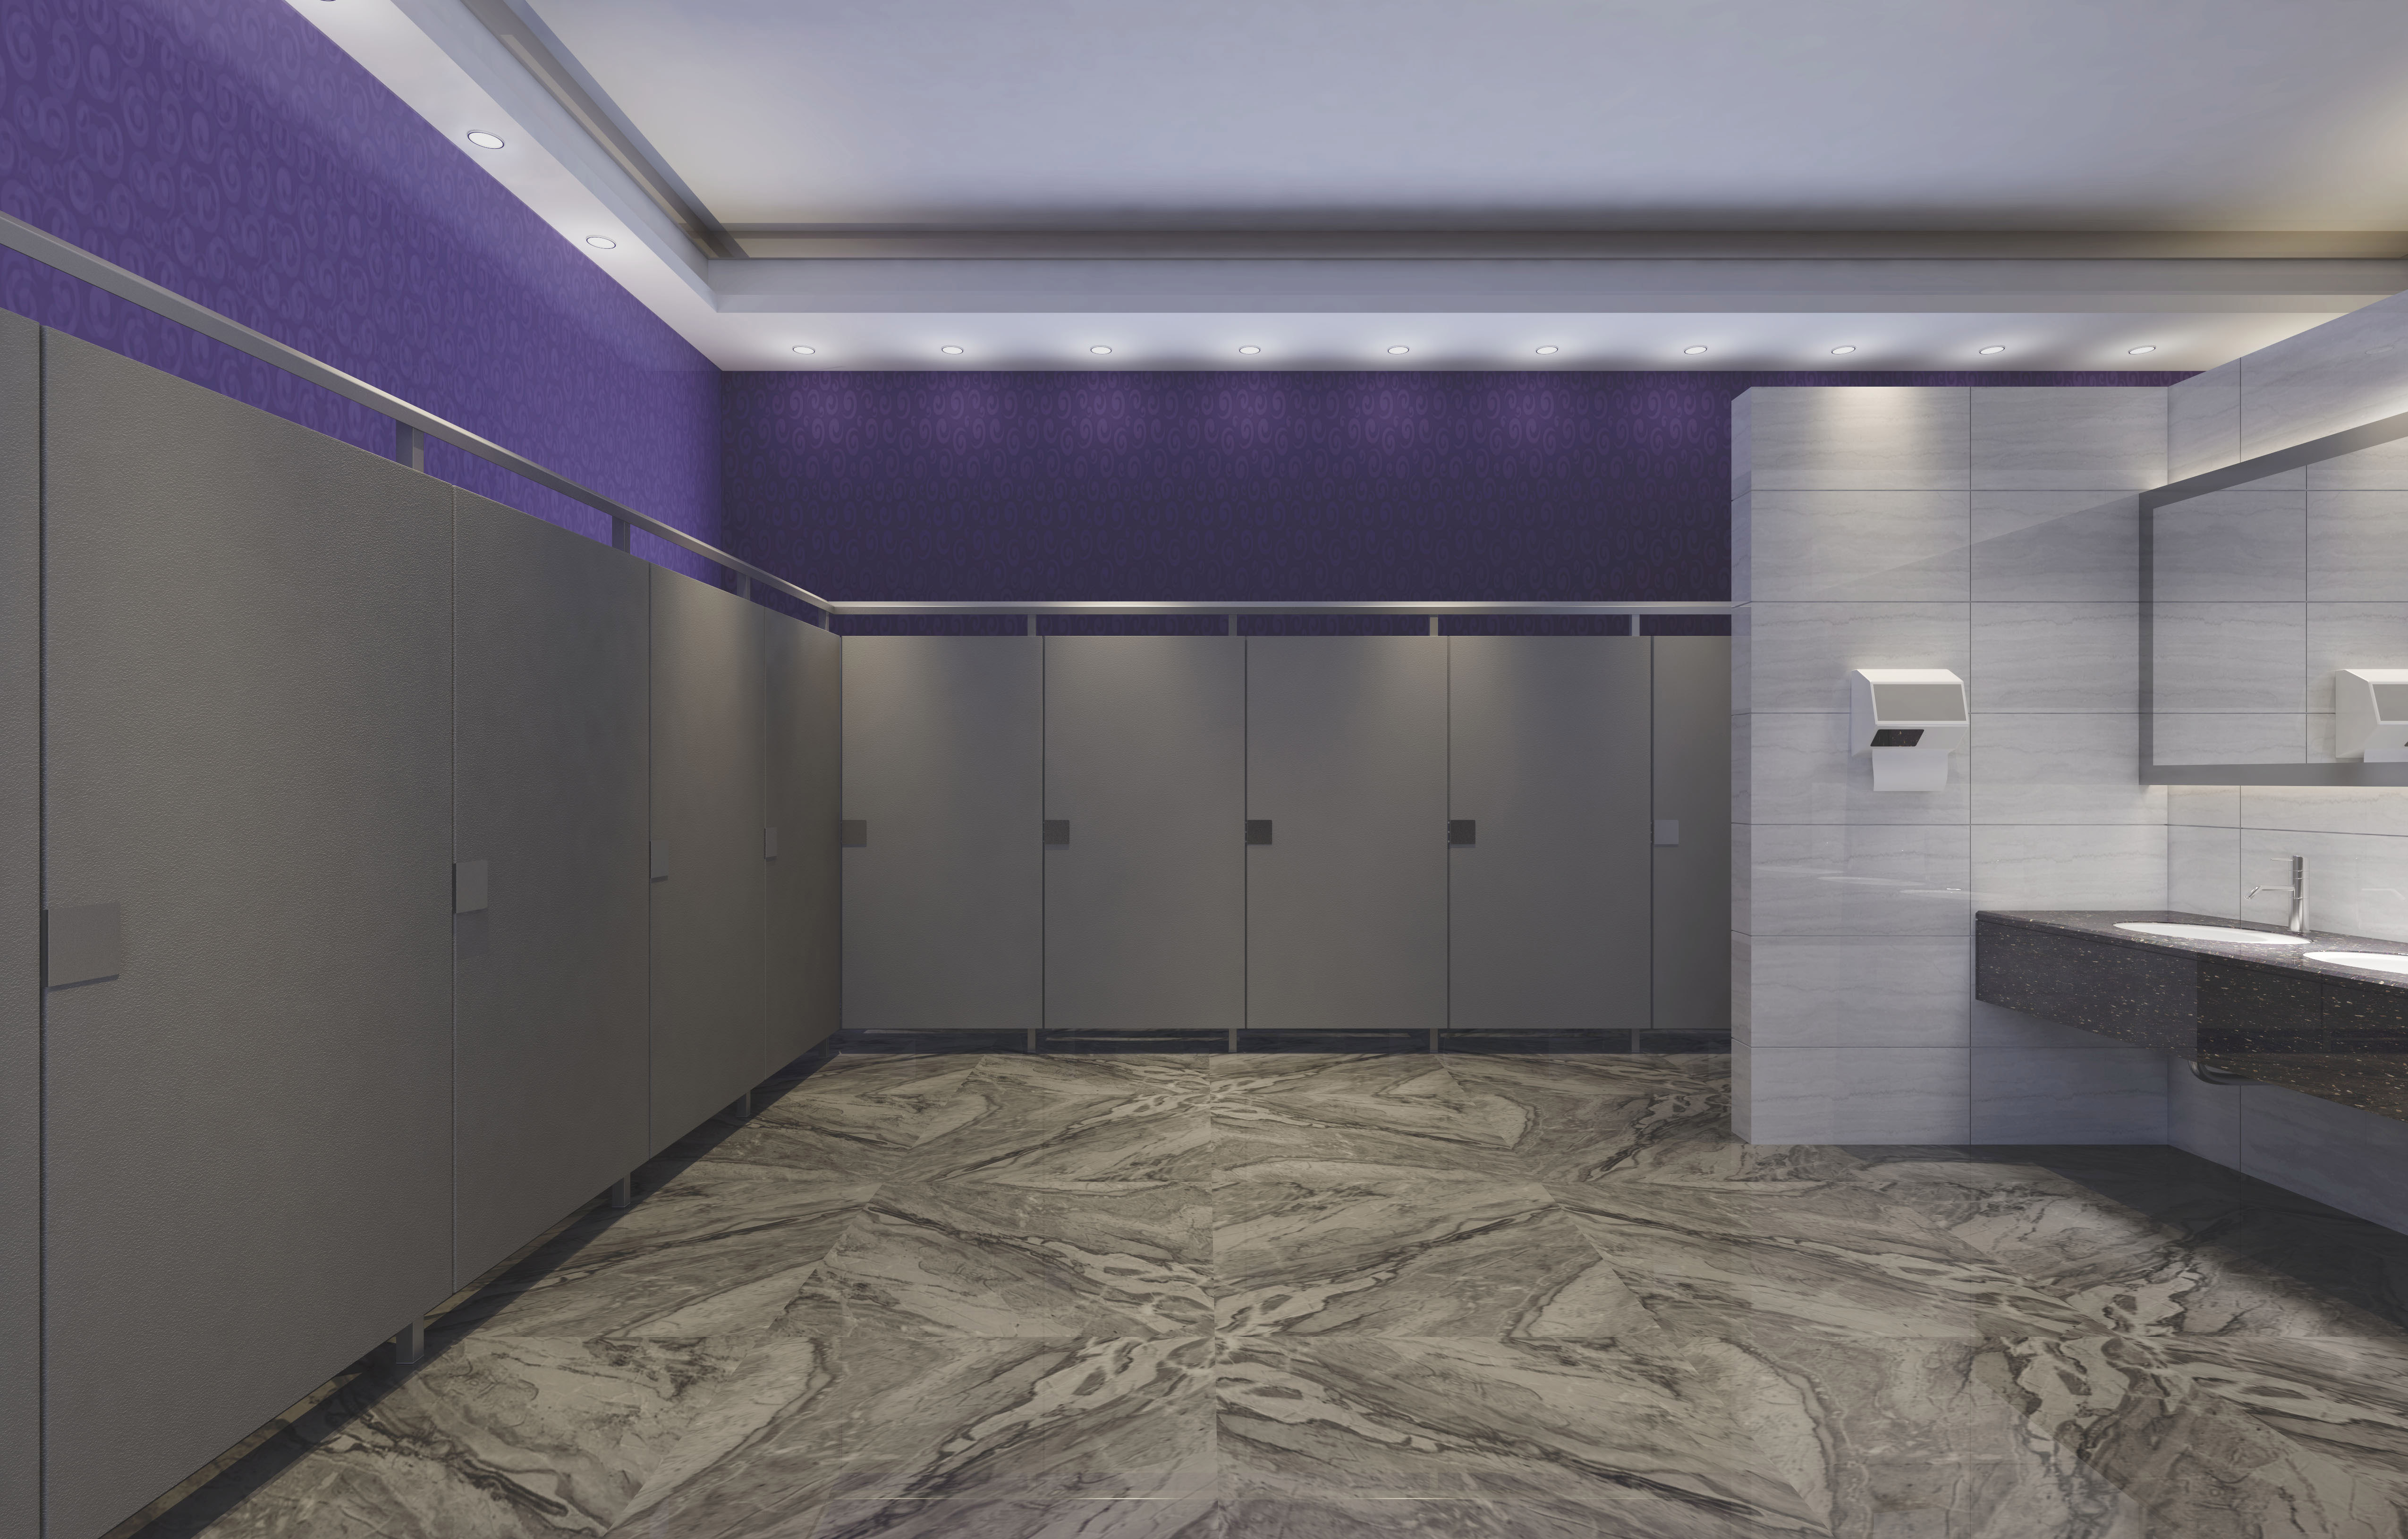 Hidden hinges and longer, angled doors and panels are features of the new toilet compartments.